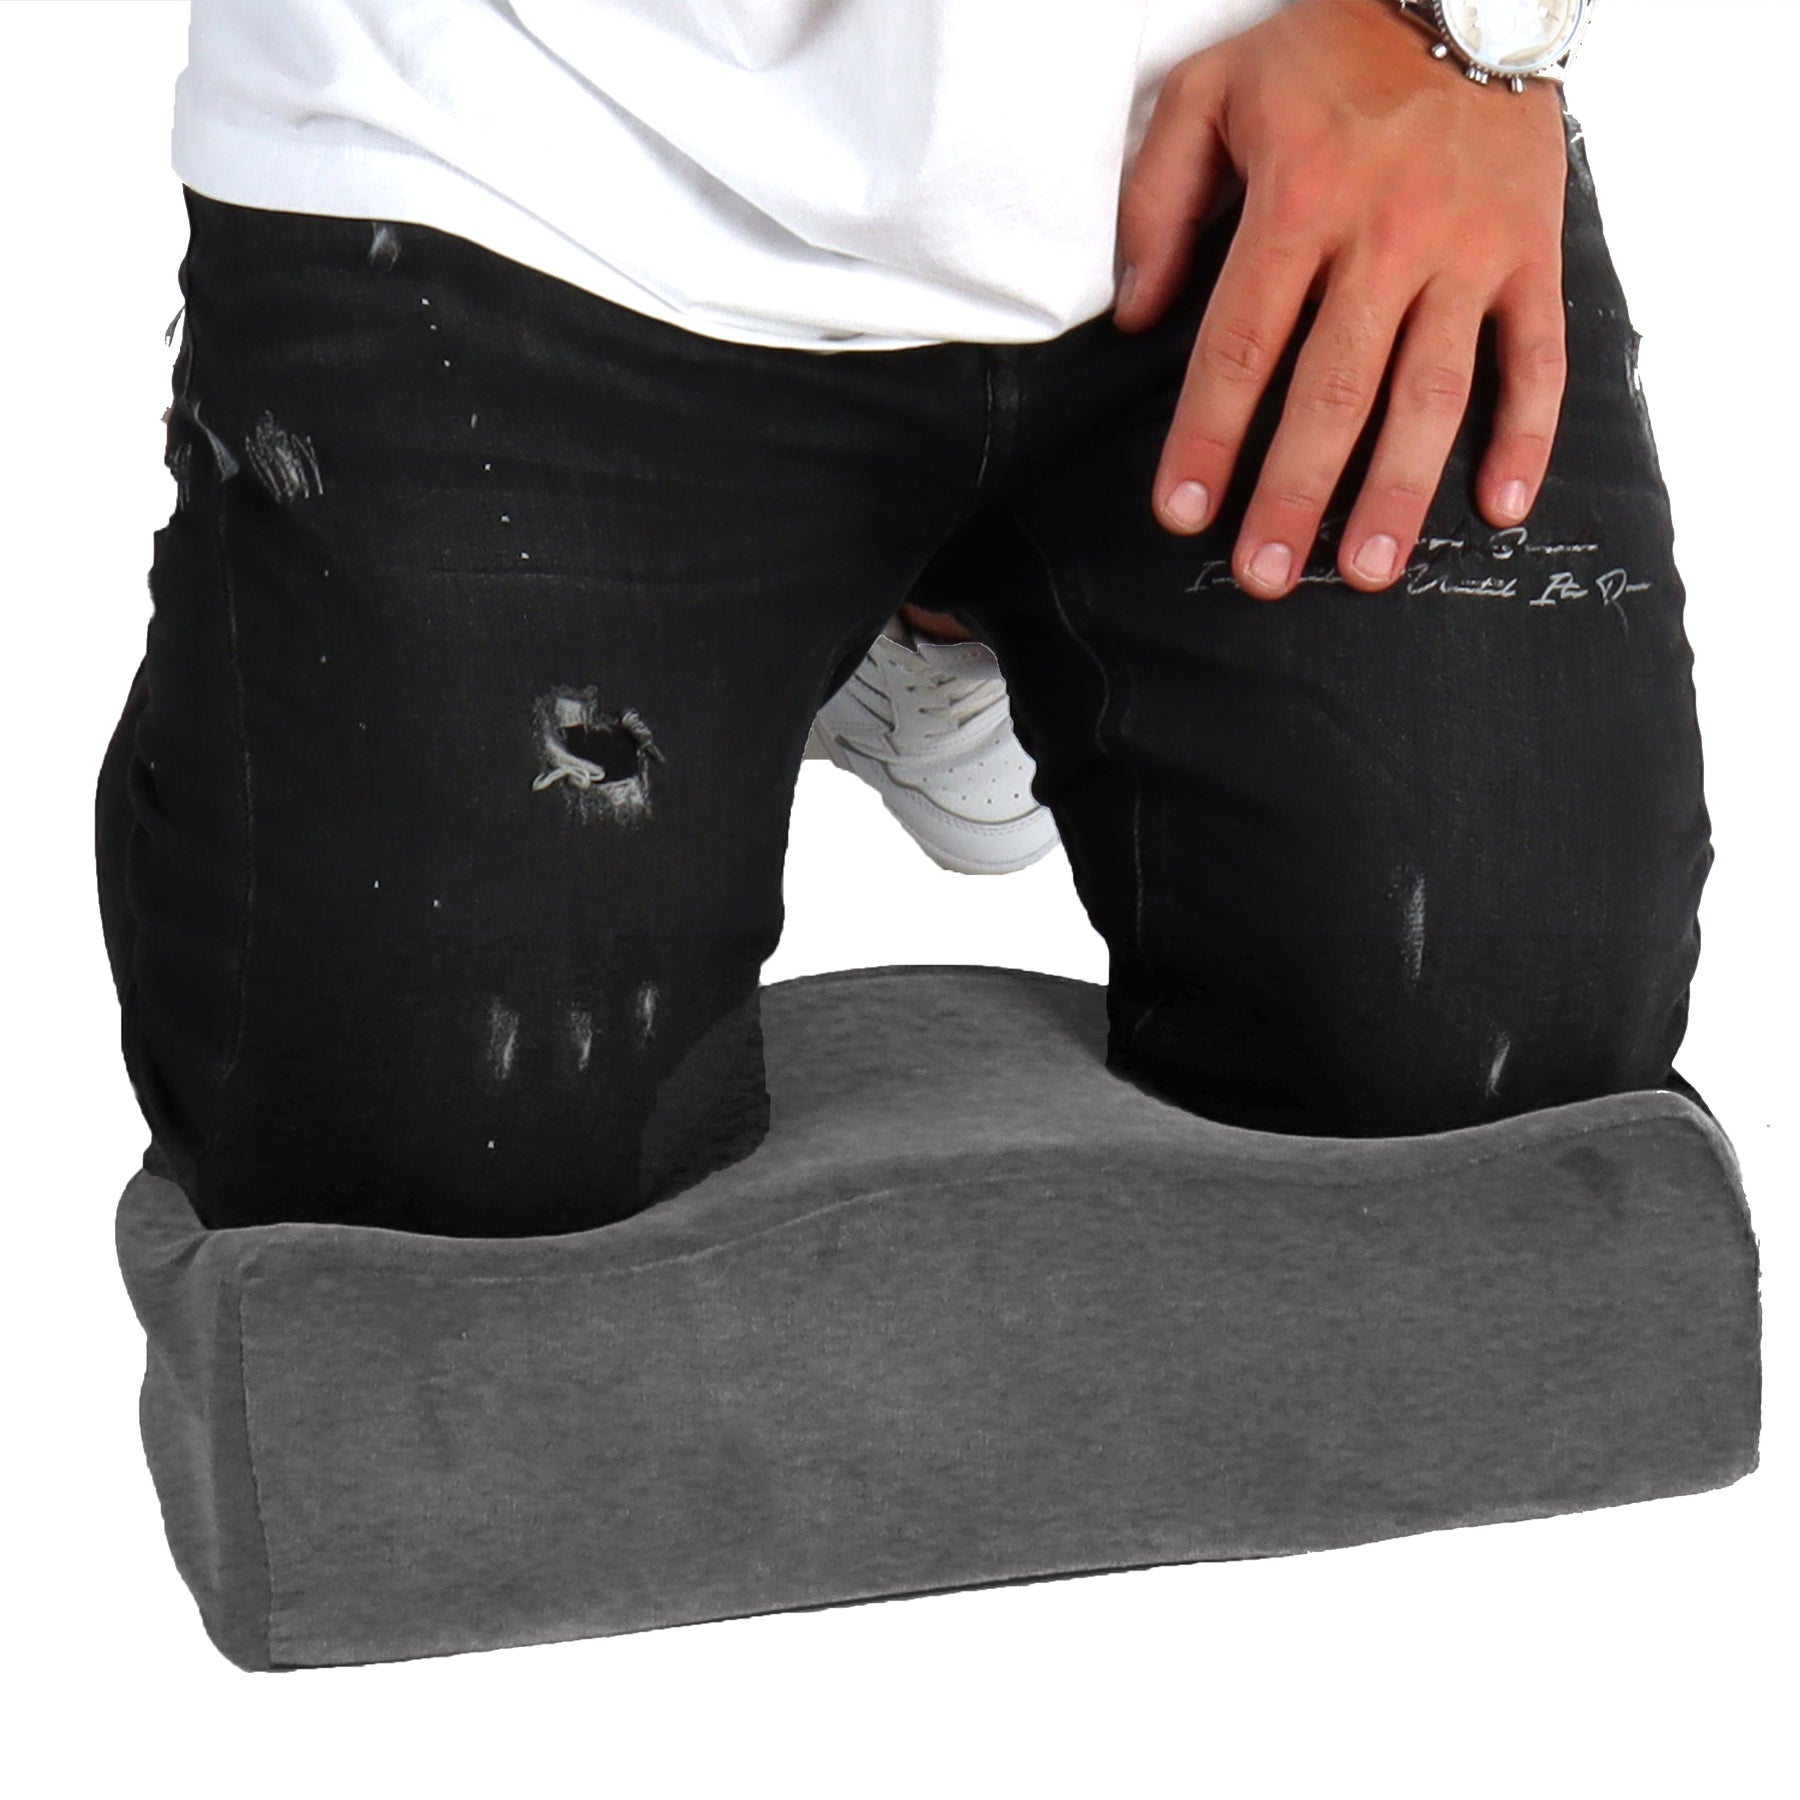 Durable & Comfortable Kneeling Pad - Ultimate Knee Protection Solution